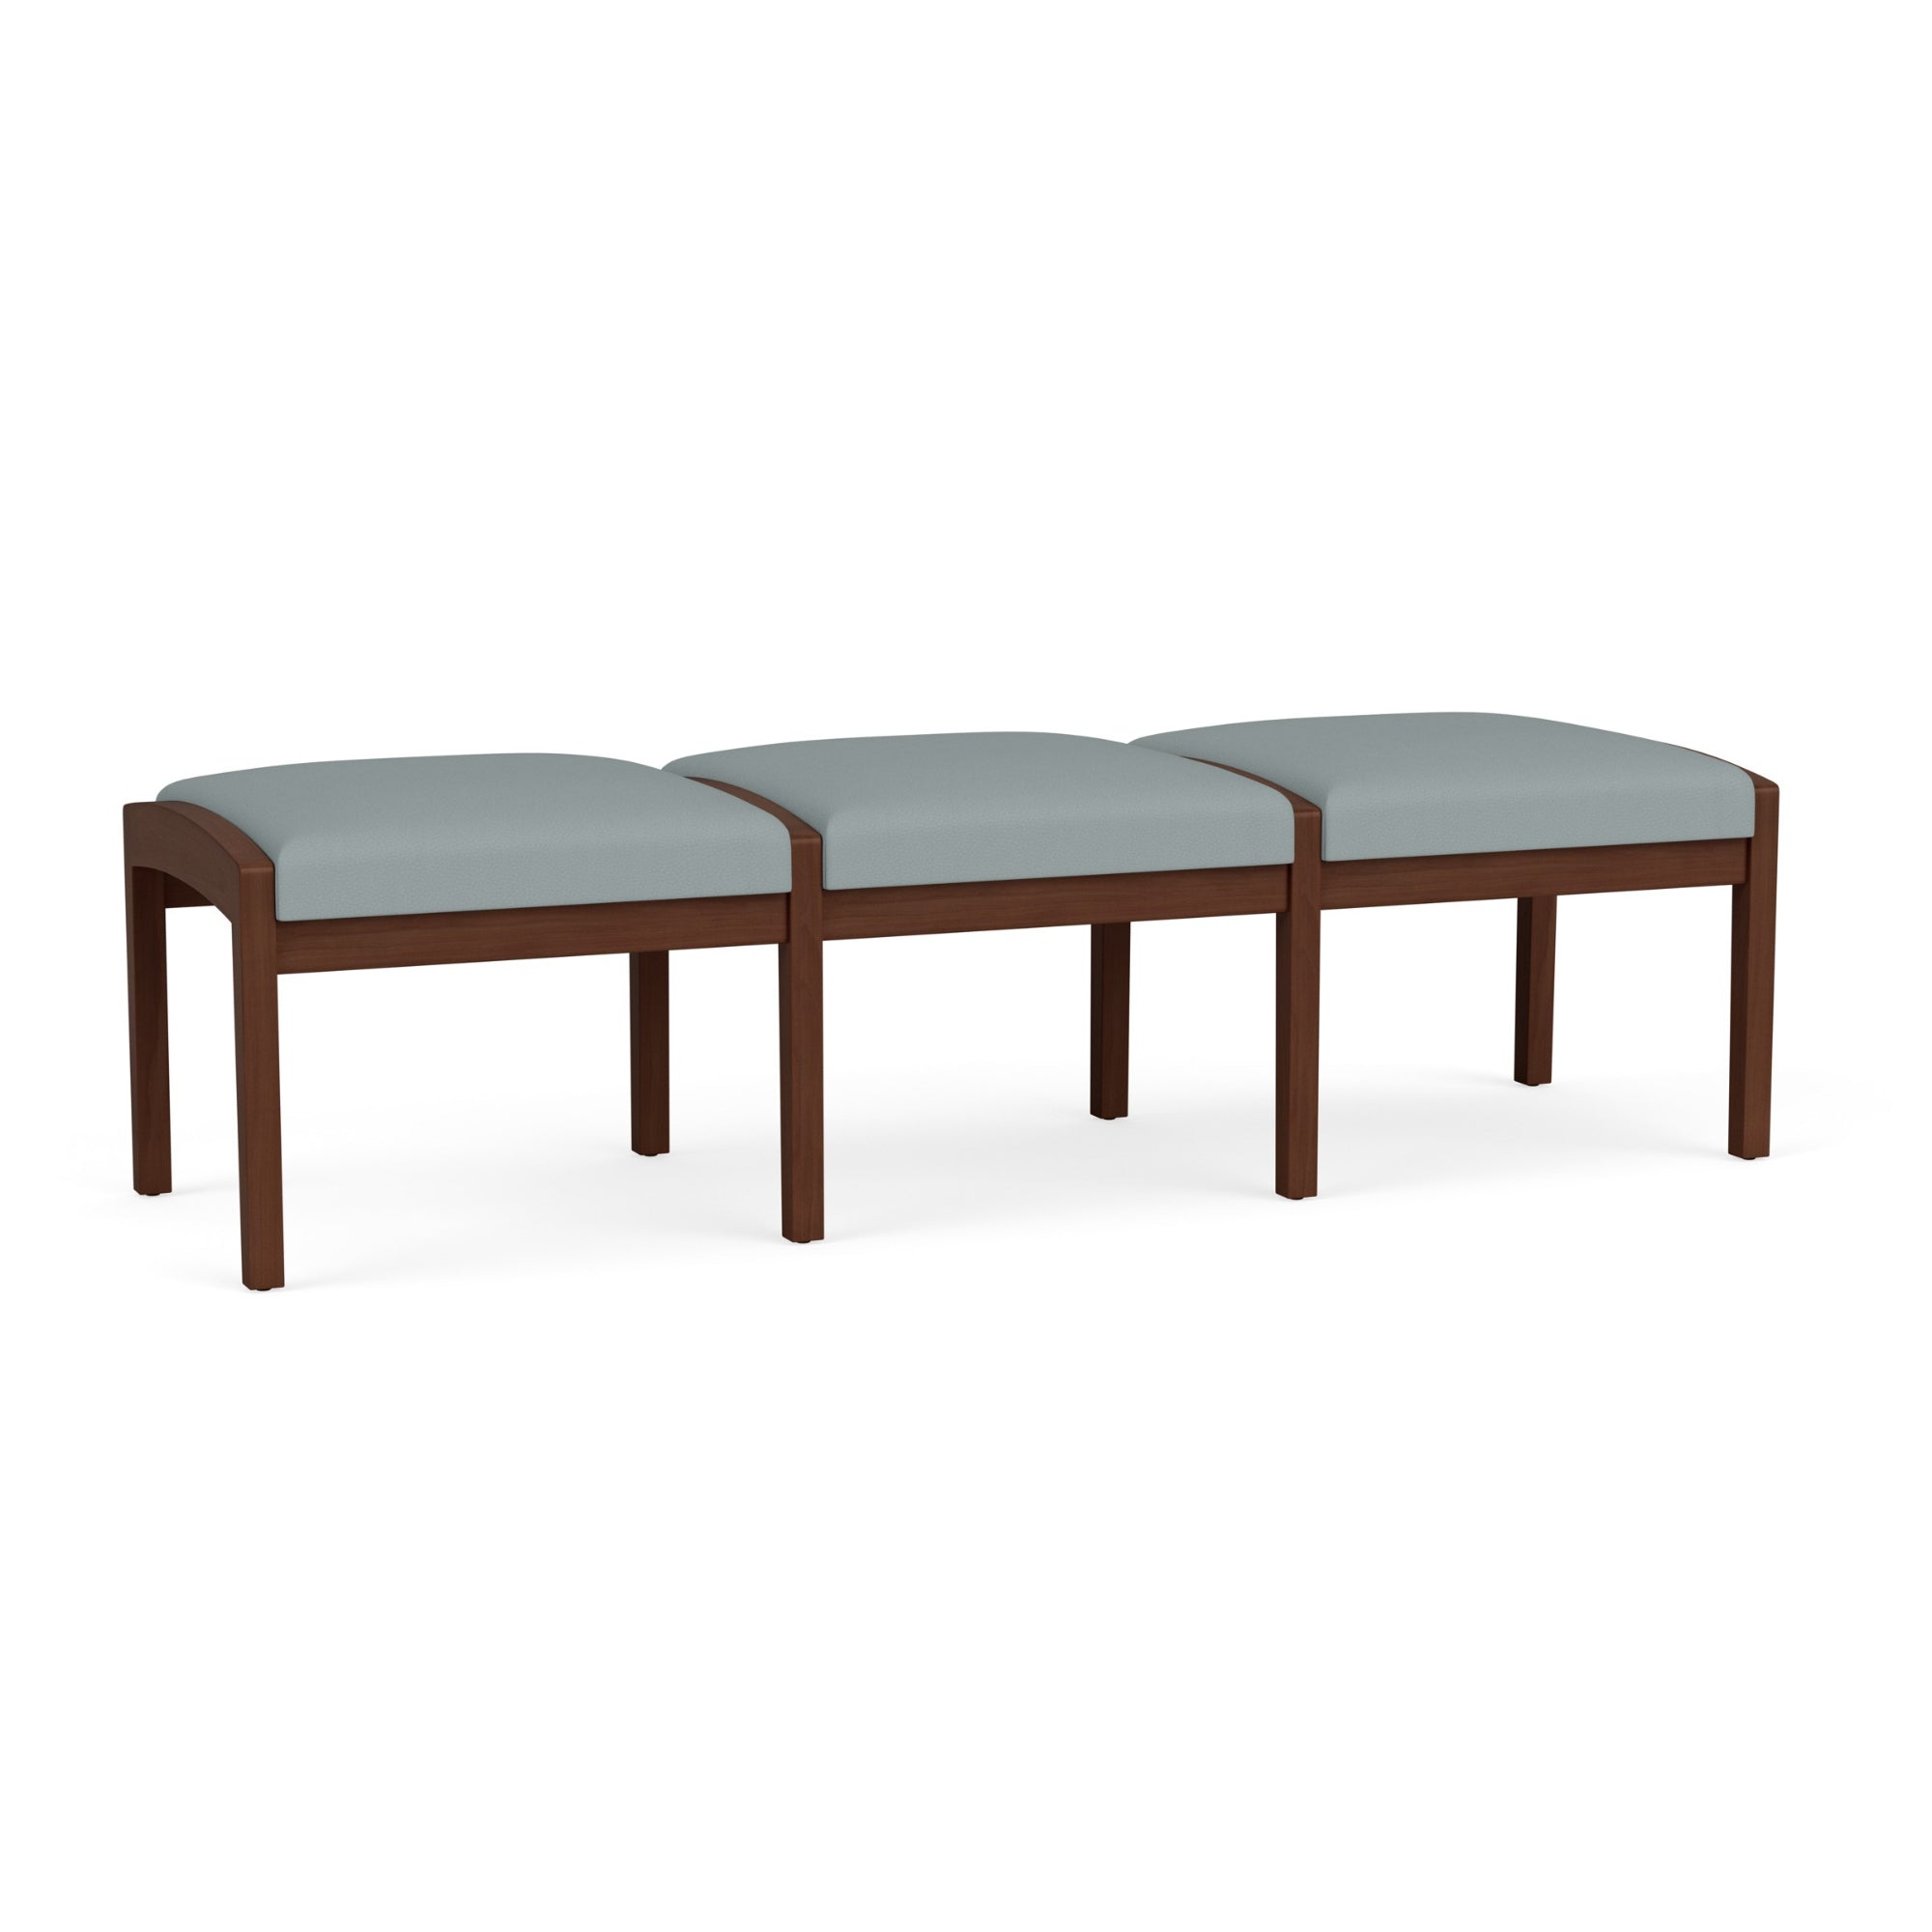 Lenox Wood Collection Reception Seating, 3 Seat Bench, Standard Vinyl Upholstery, FREE SHIPPING